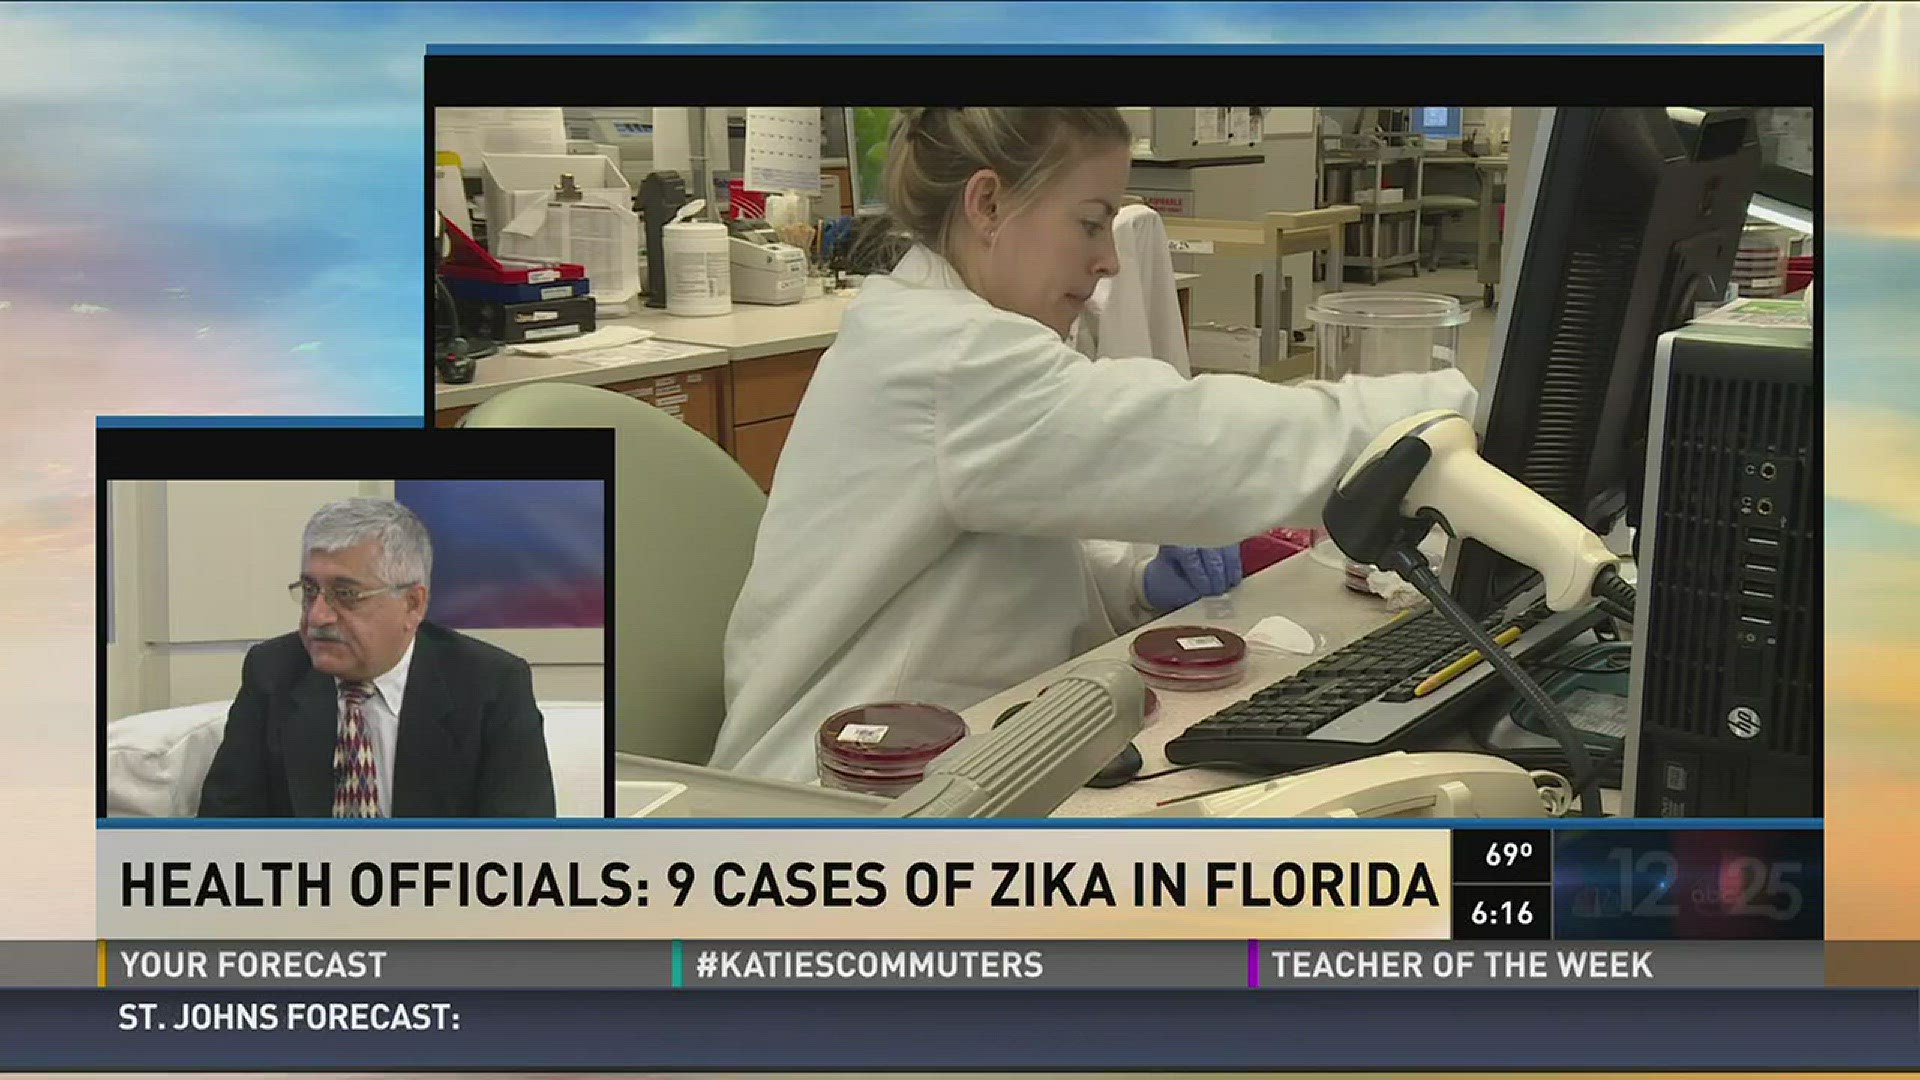 Dr. Mobeen Rathore who specializes in Pediatric Infectious Diseases and Immunology at UF Health answers questions about the Zika virus on Good Morning Jacksonville at 6 a.m. 2/3/2016